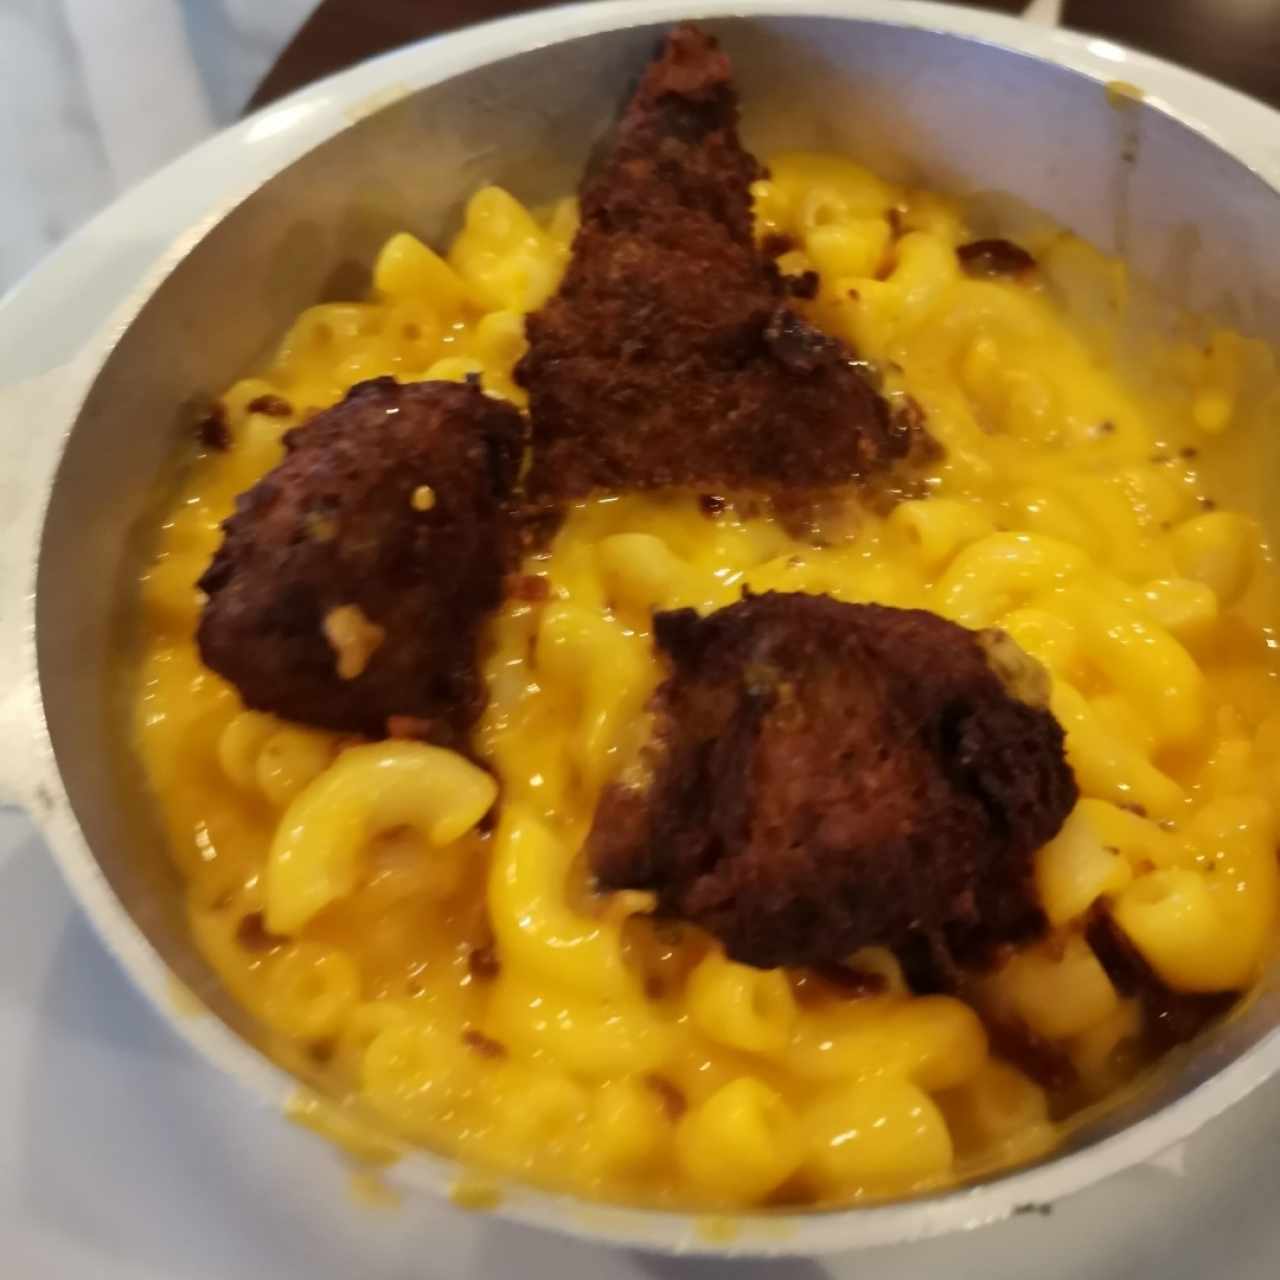 Mac and cheese con carne